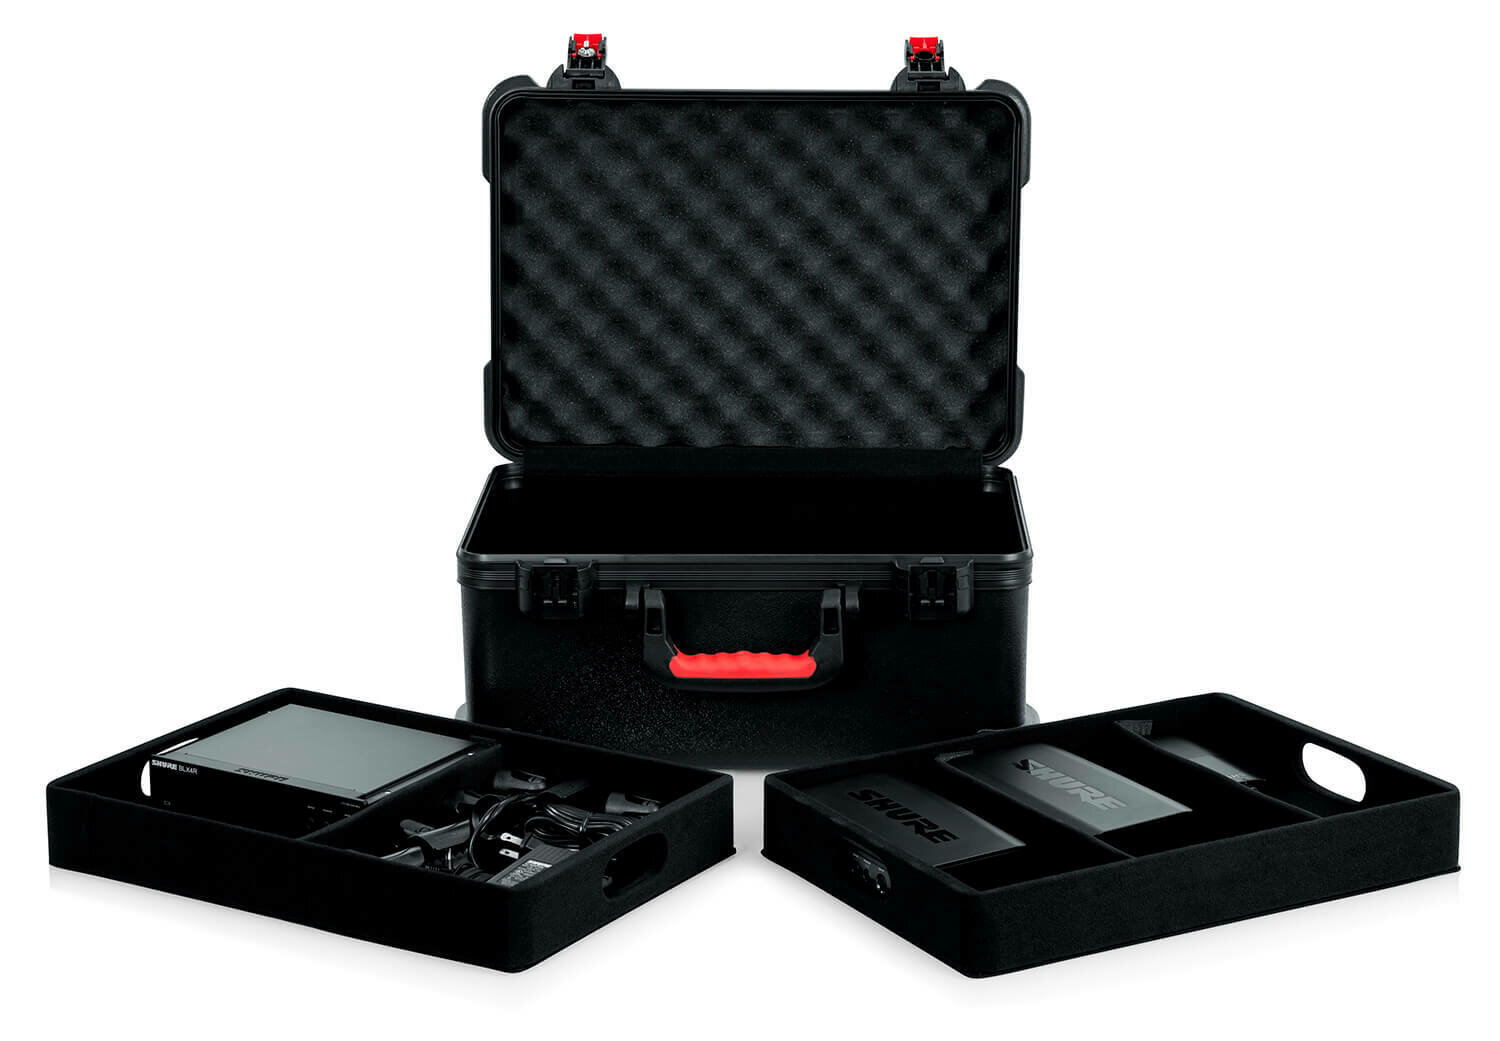 Gator Cases GTSA-MICW7 ATA-Molded Polyethylene Case with 2 Lift-Out Trays for up to 7 Wireless Microphones & Accessories #GAGTSAMICW7 MFR #GTSA-MICW7